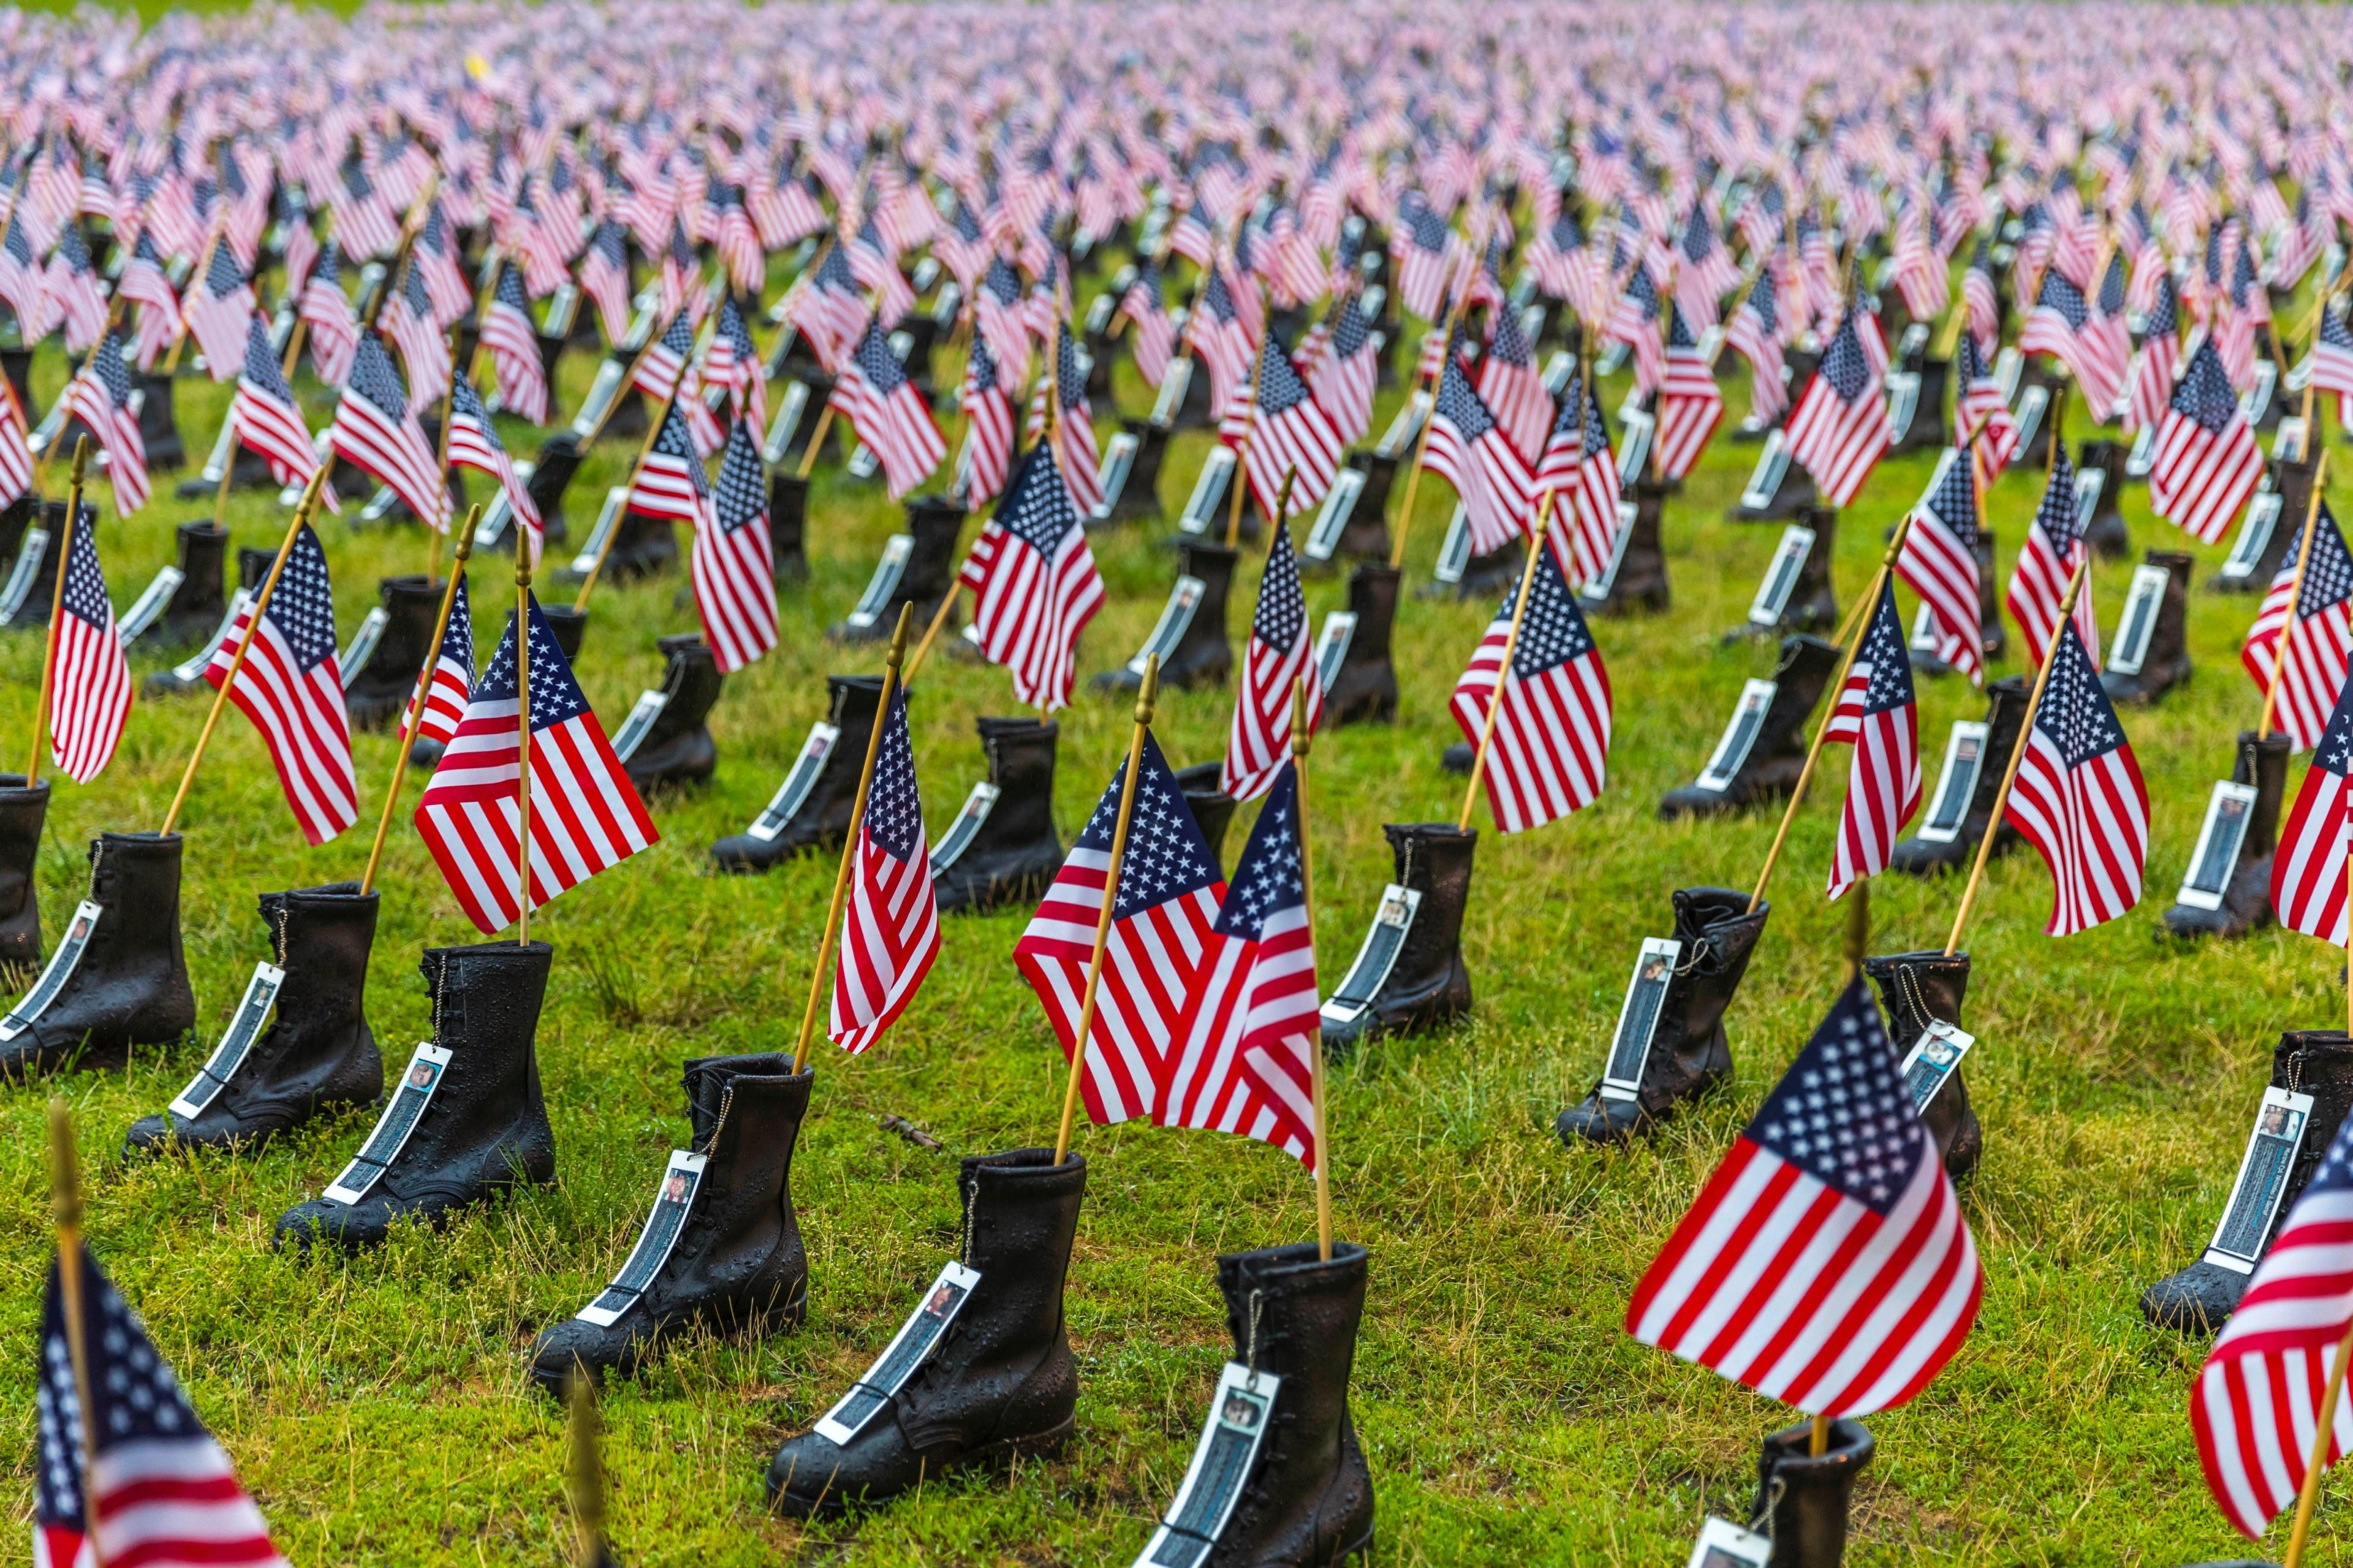 Wallpaper ID 250551 a memorial display of rows of boots with